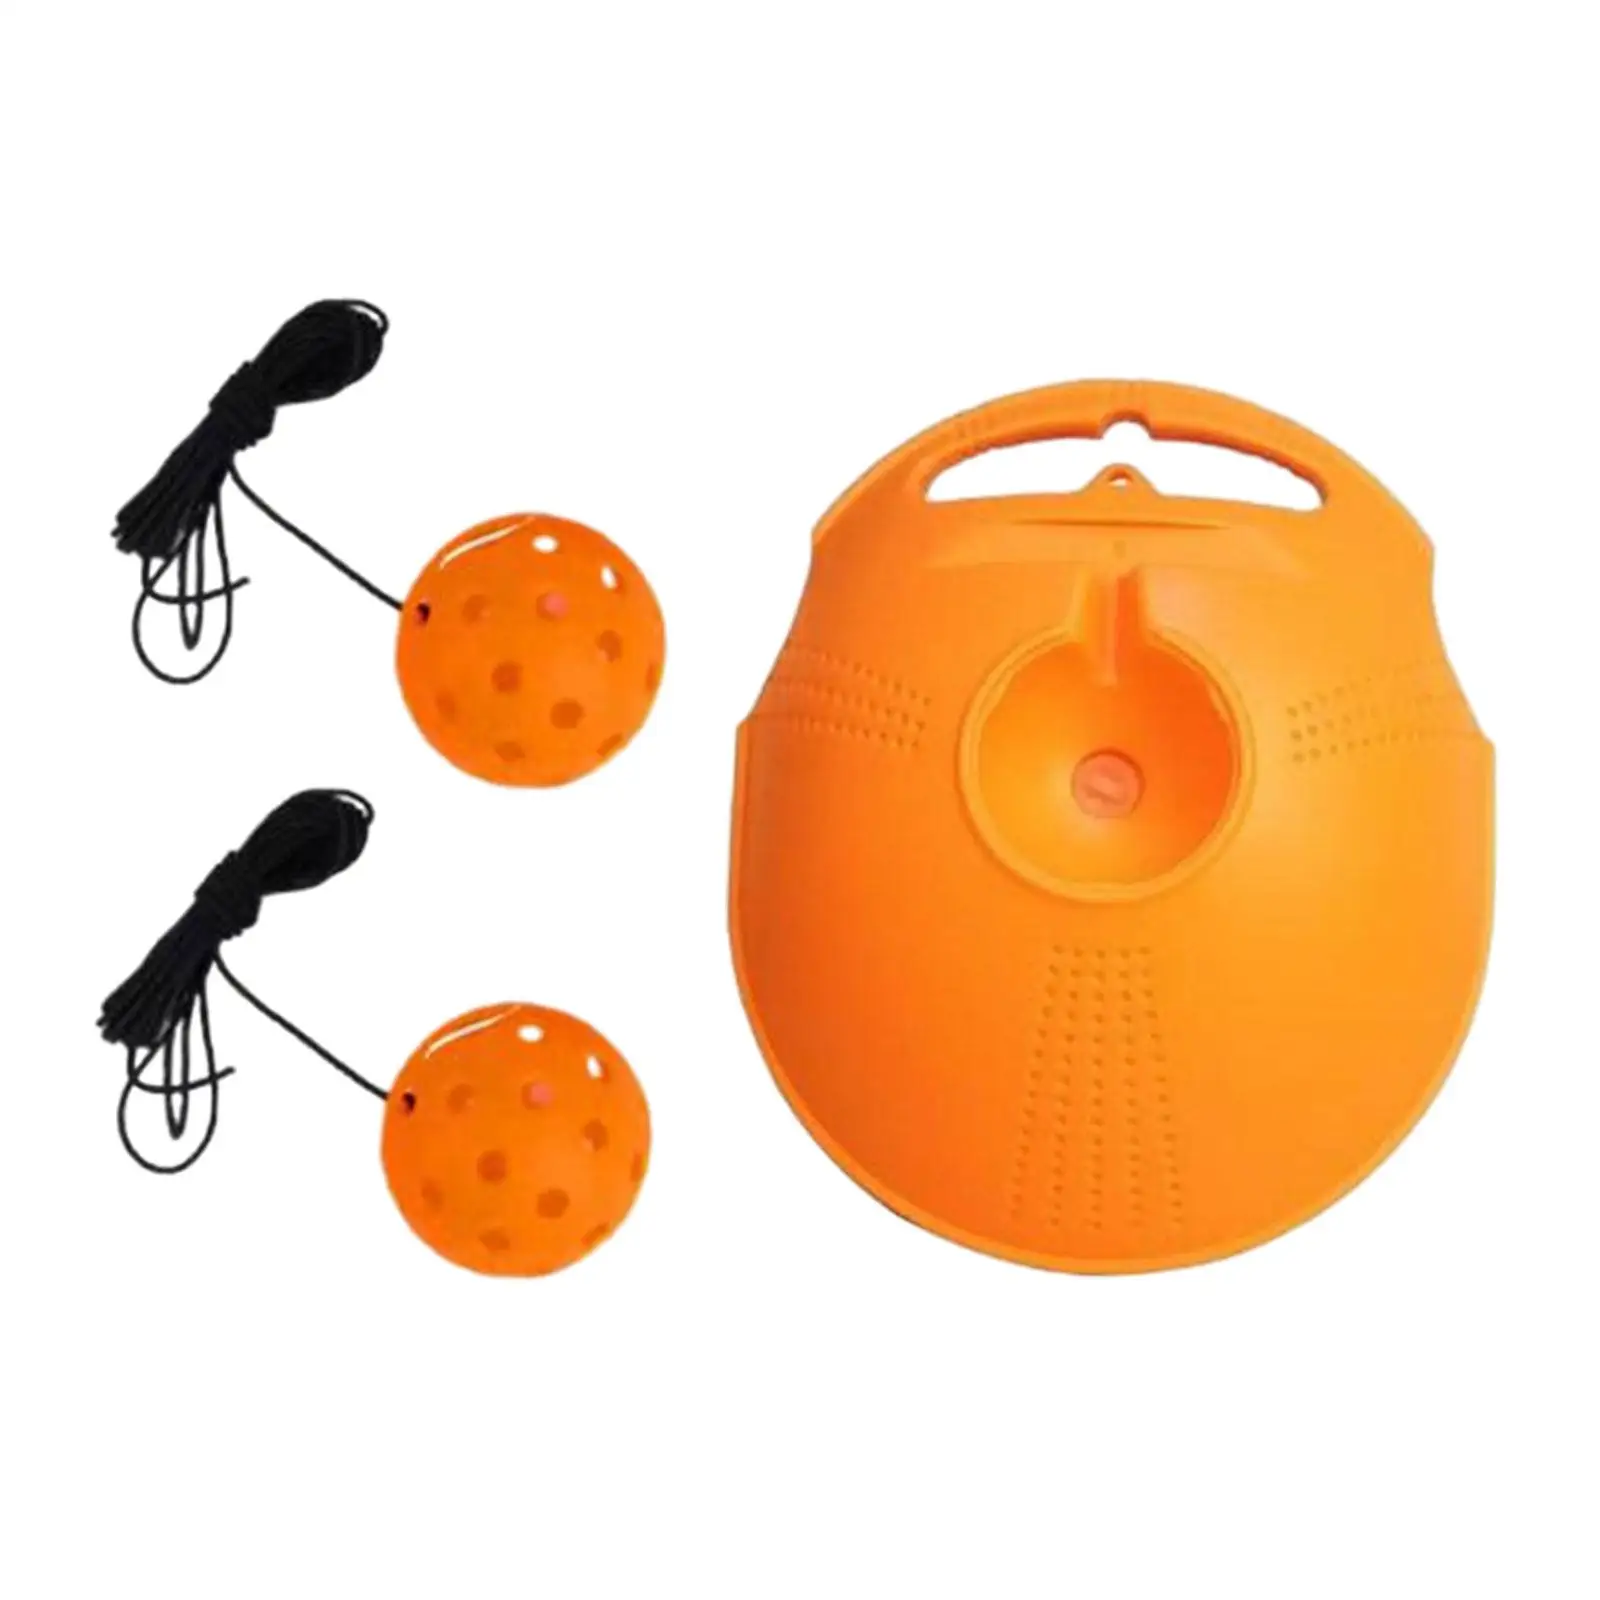 Pickleball Trainer Pickleball Training Tool with Pickleball Ball Cord Convenient